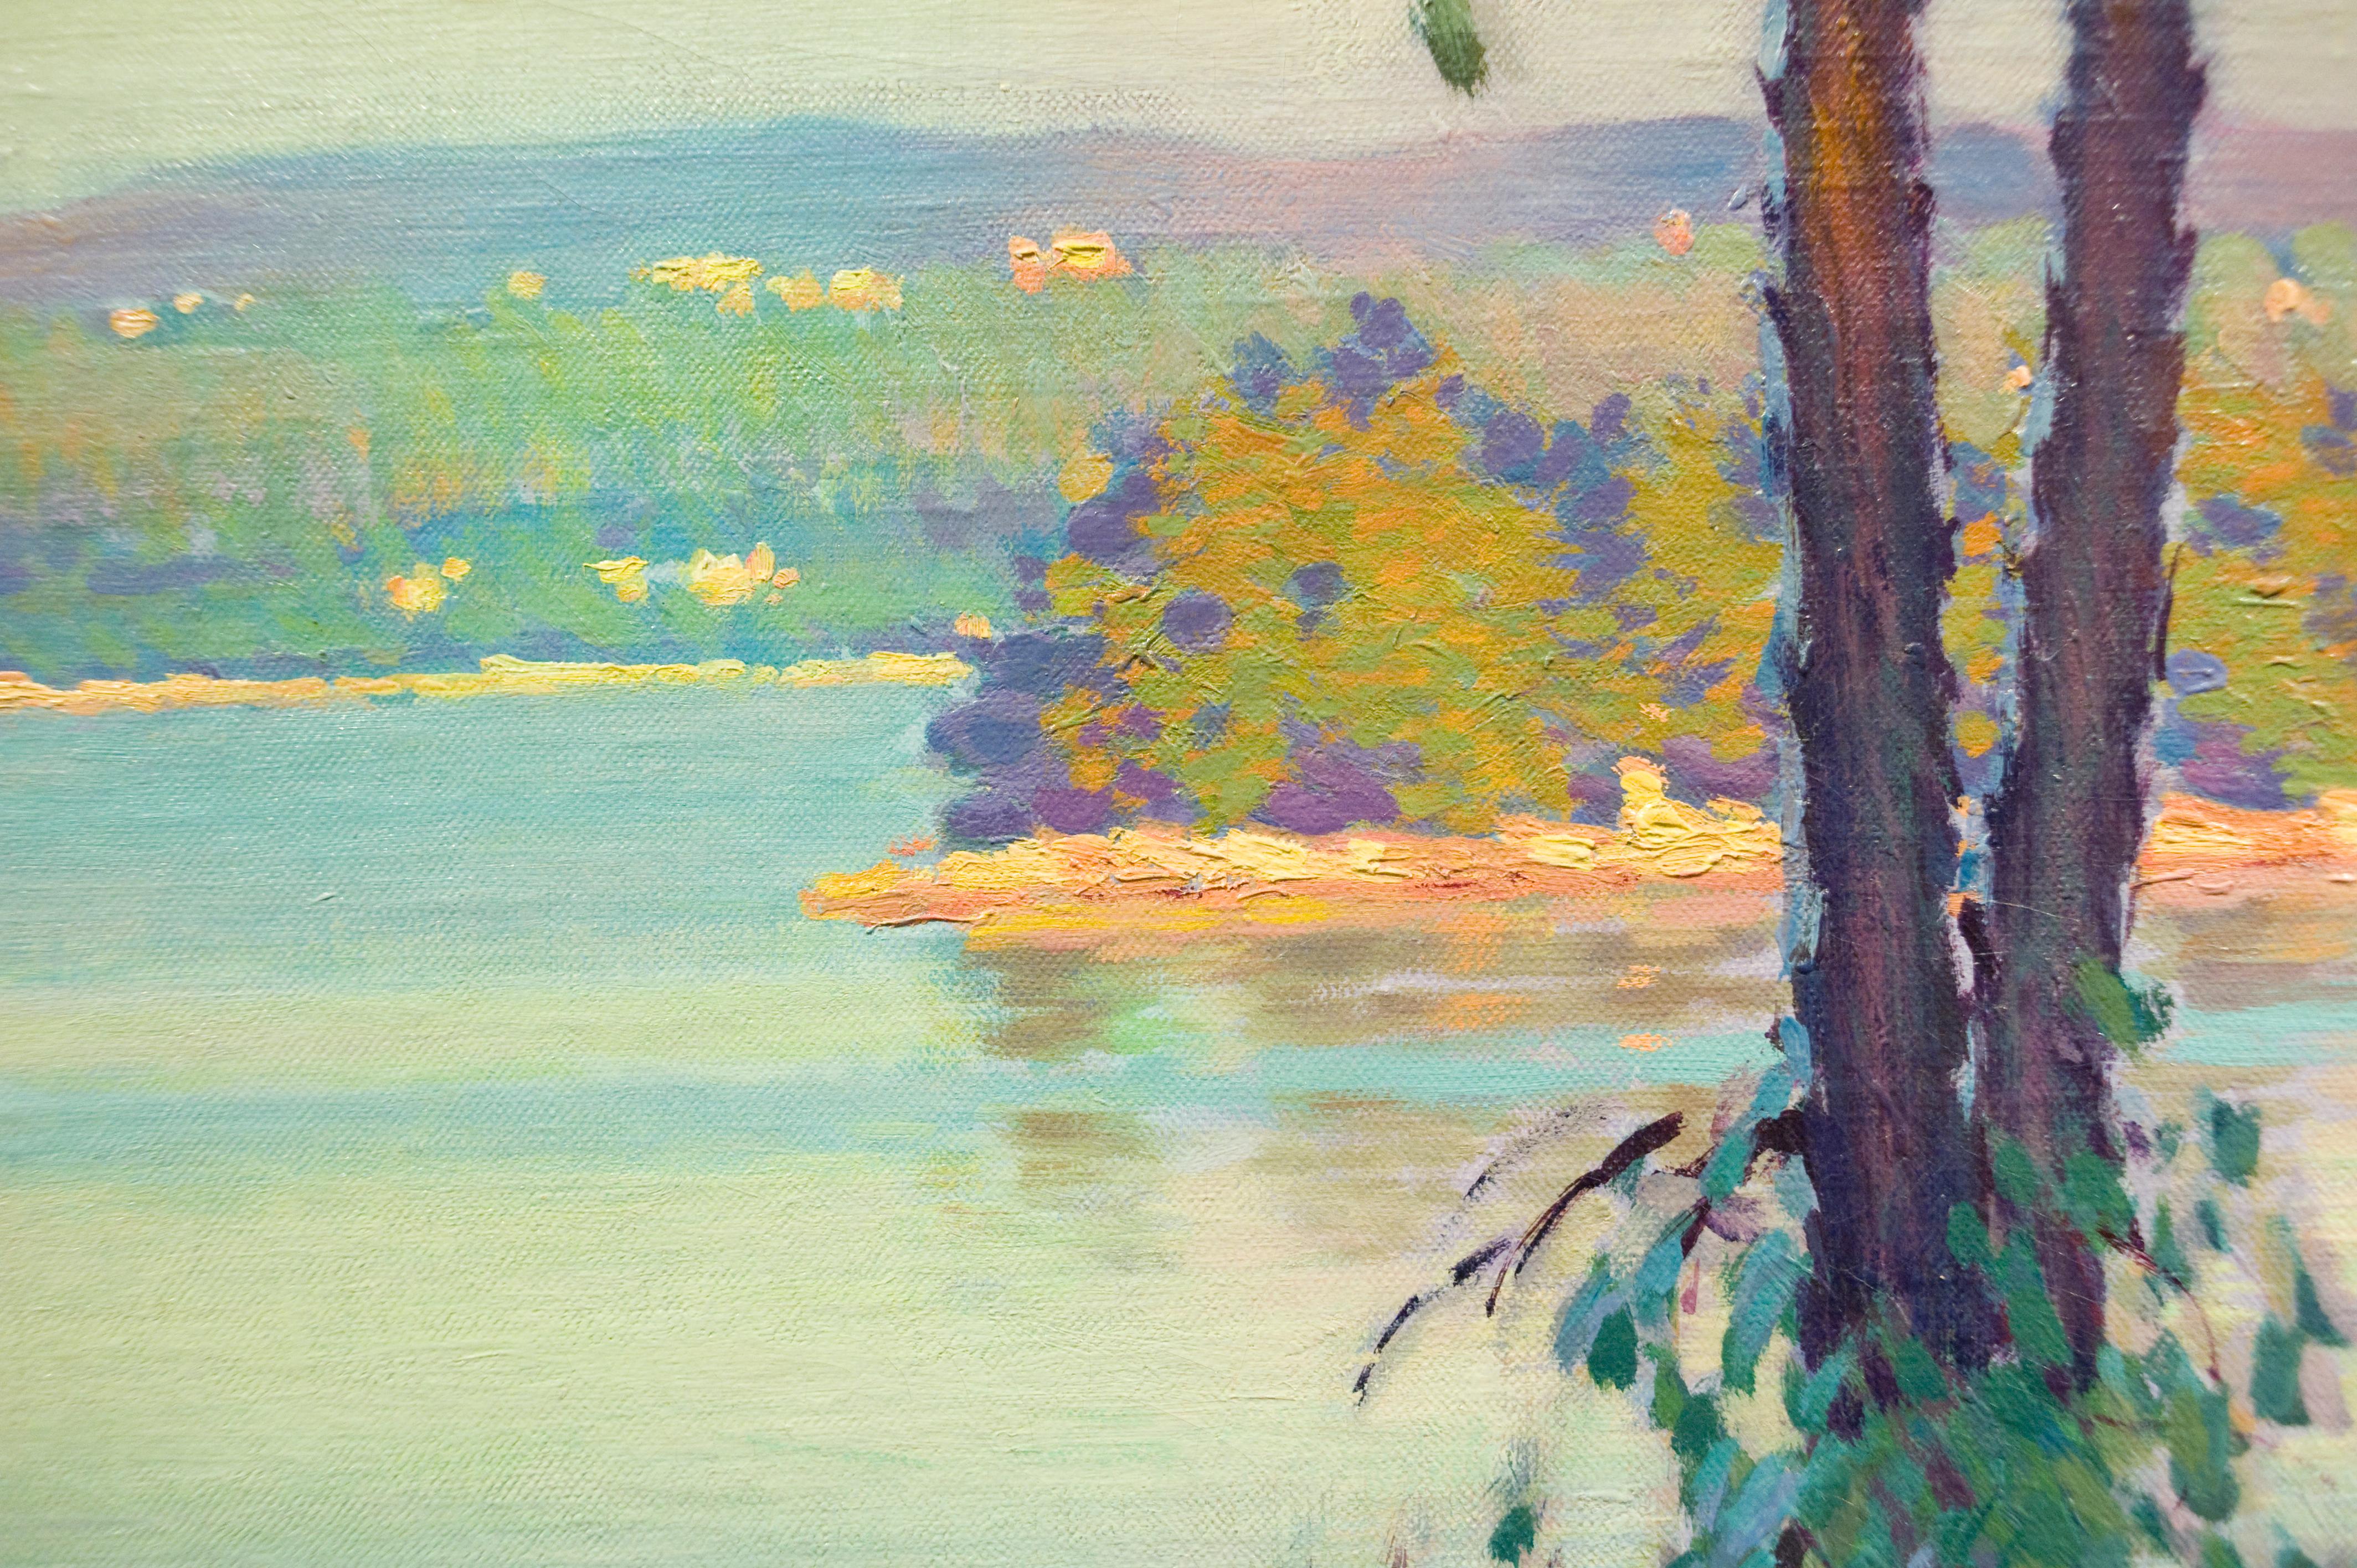 Edward Dufner was dubbed the, “Painter of Sunshine” by his peers due to his masterful rendering of atmospheric effects. His paintings are highly sought after for their luminous portrayal of sunlight infused in nature, and his subjects convey a